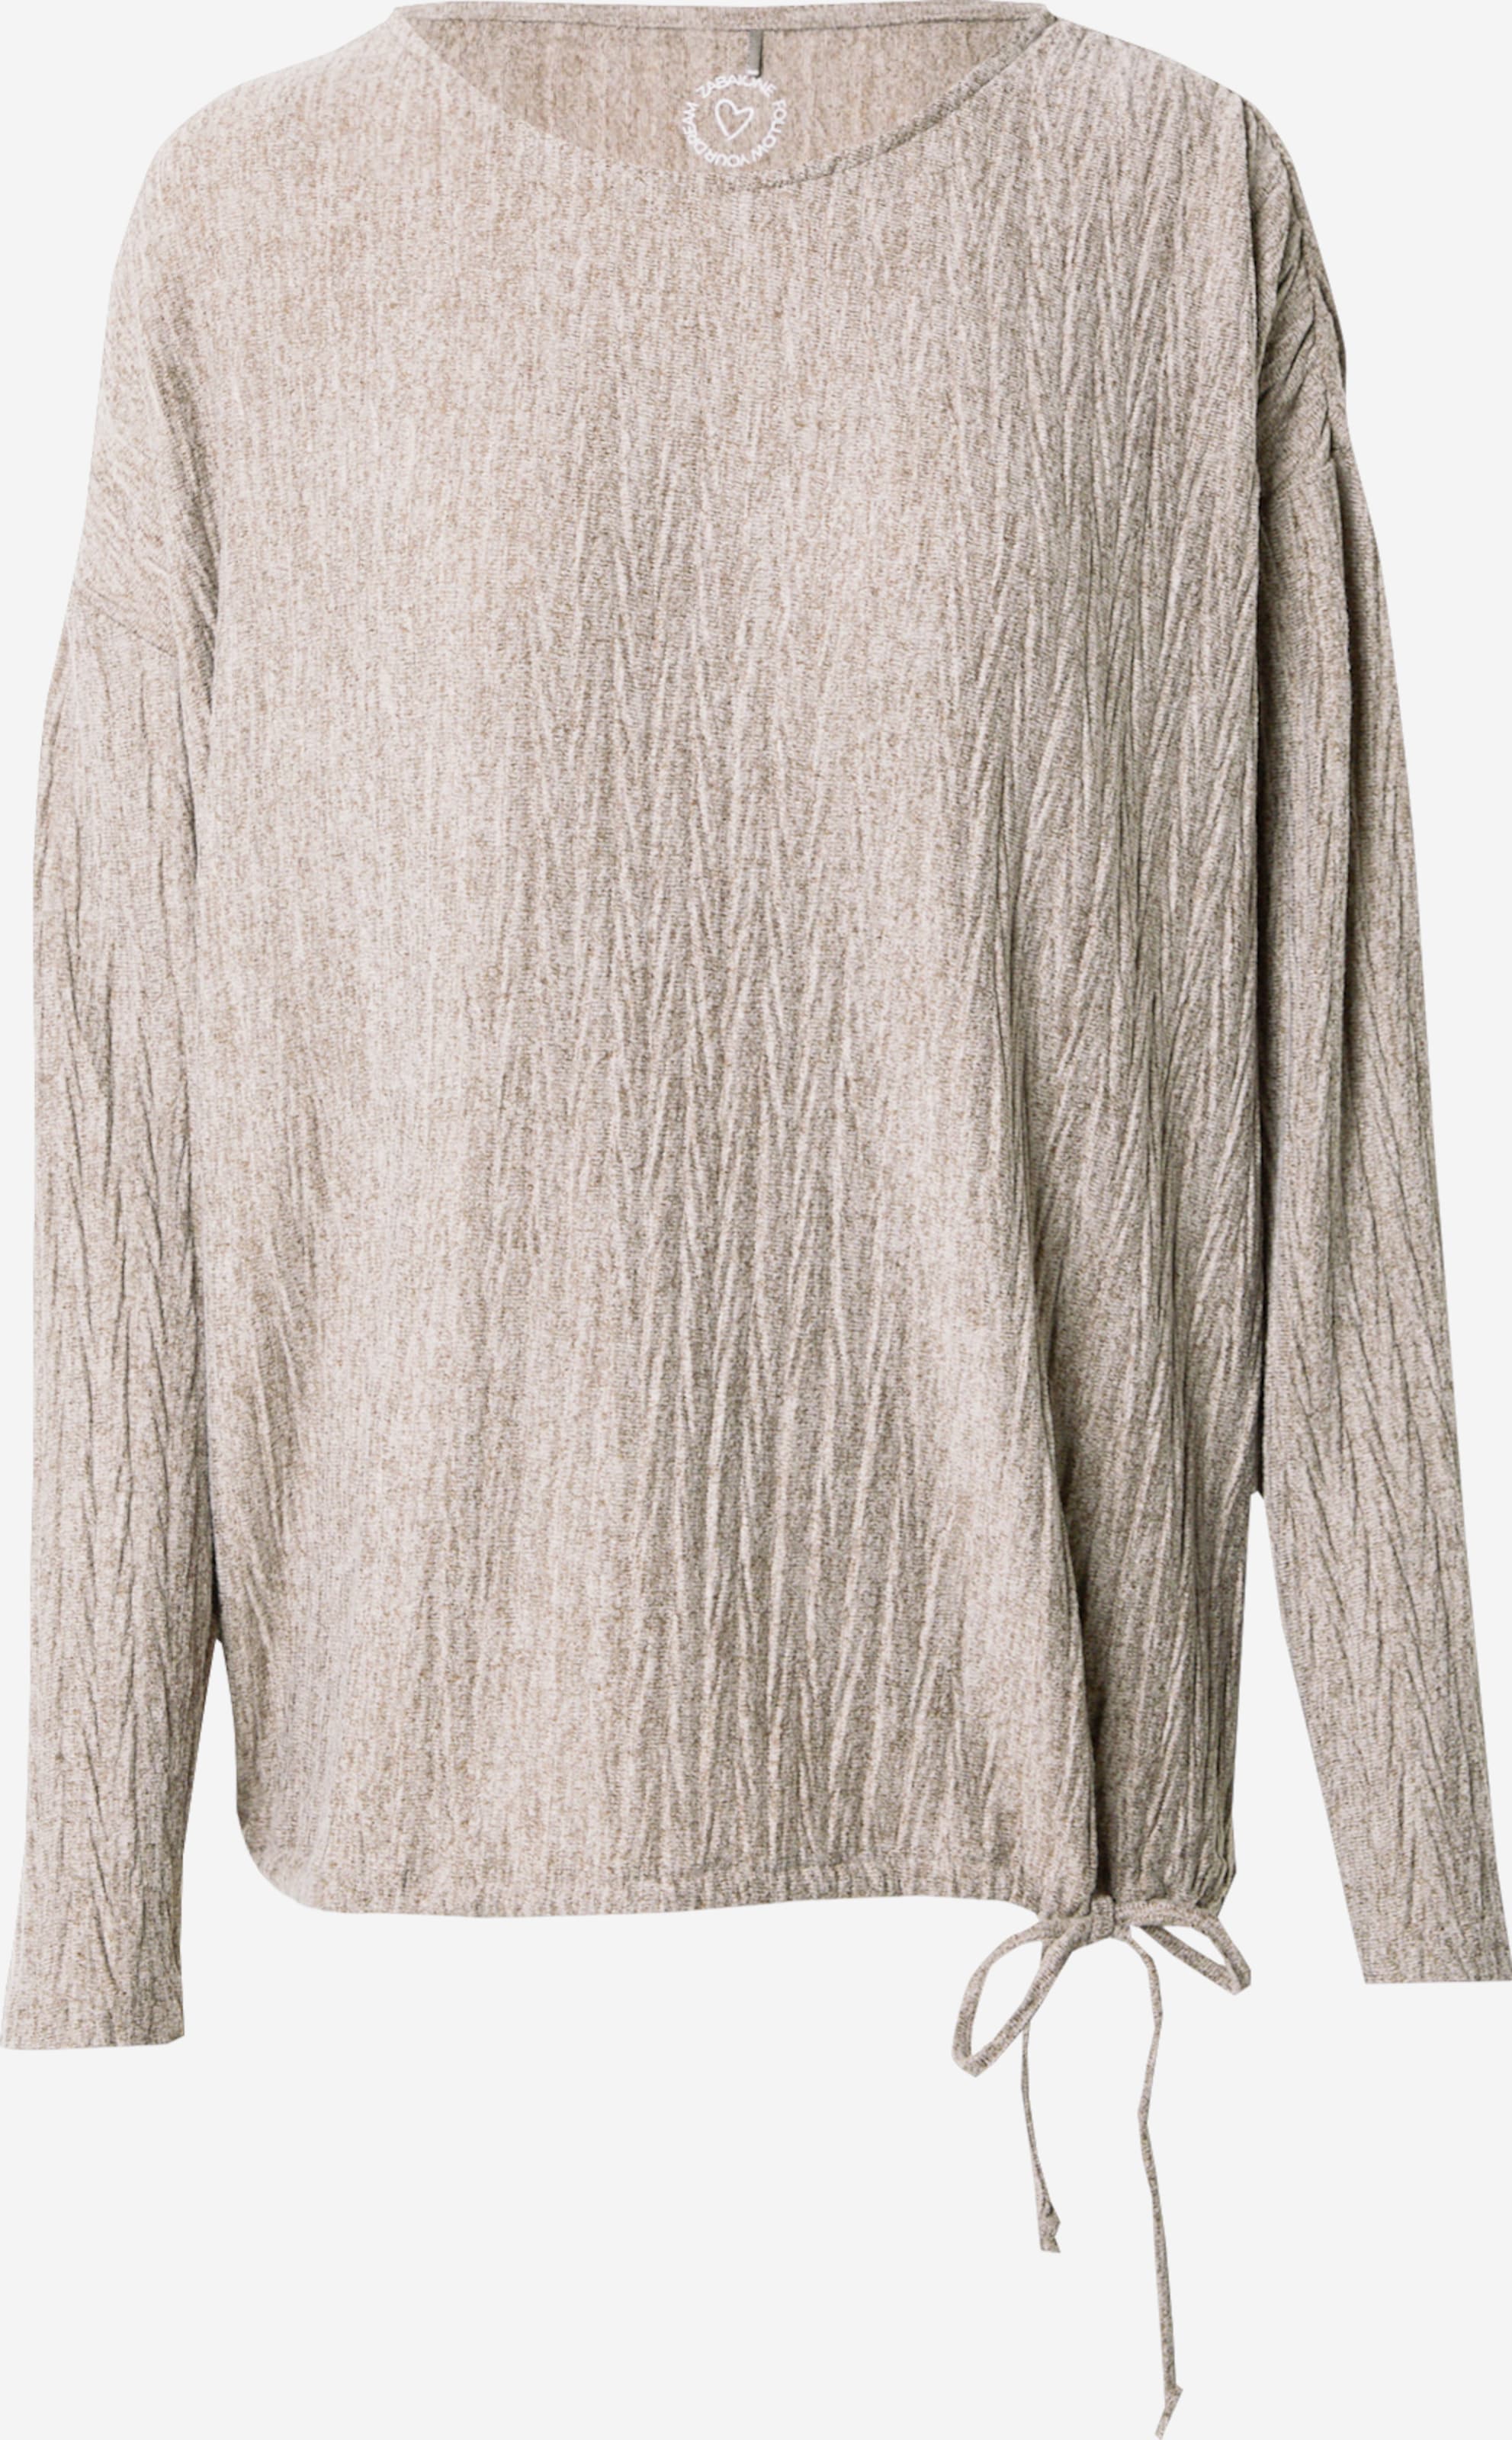 | YOU \'Sa44nj\' ABOUT ZABAIONE Taupe in Shirt